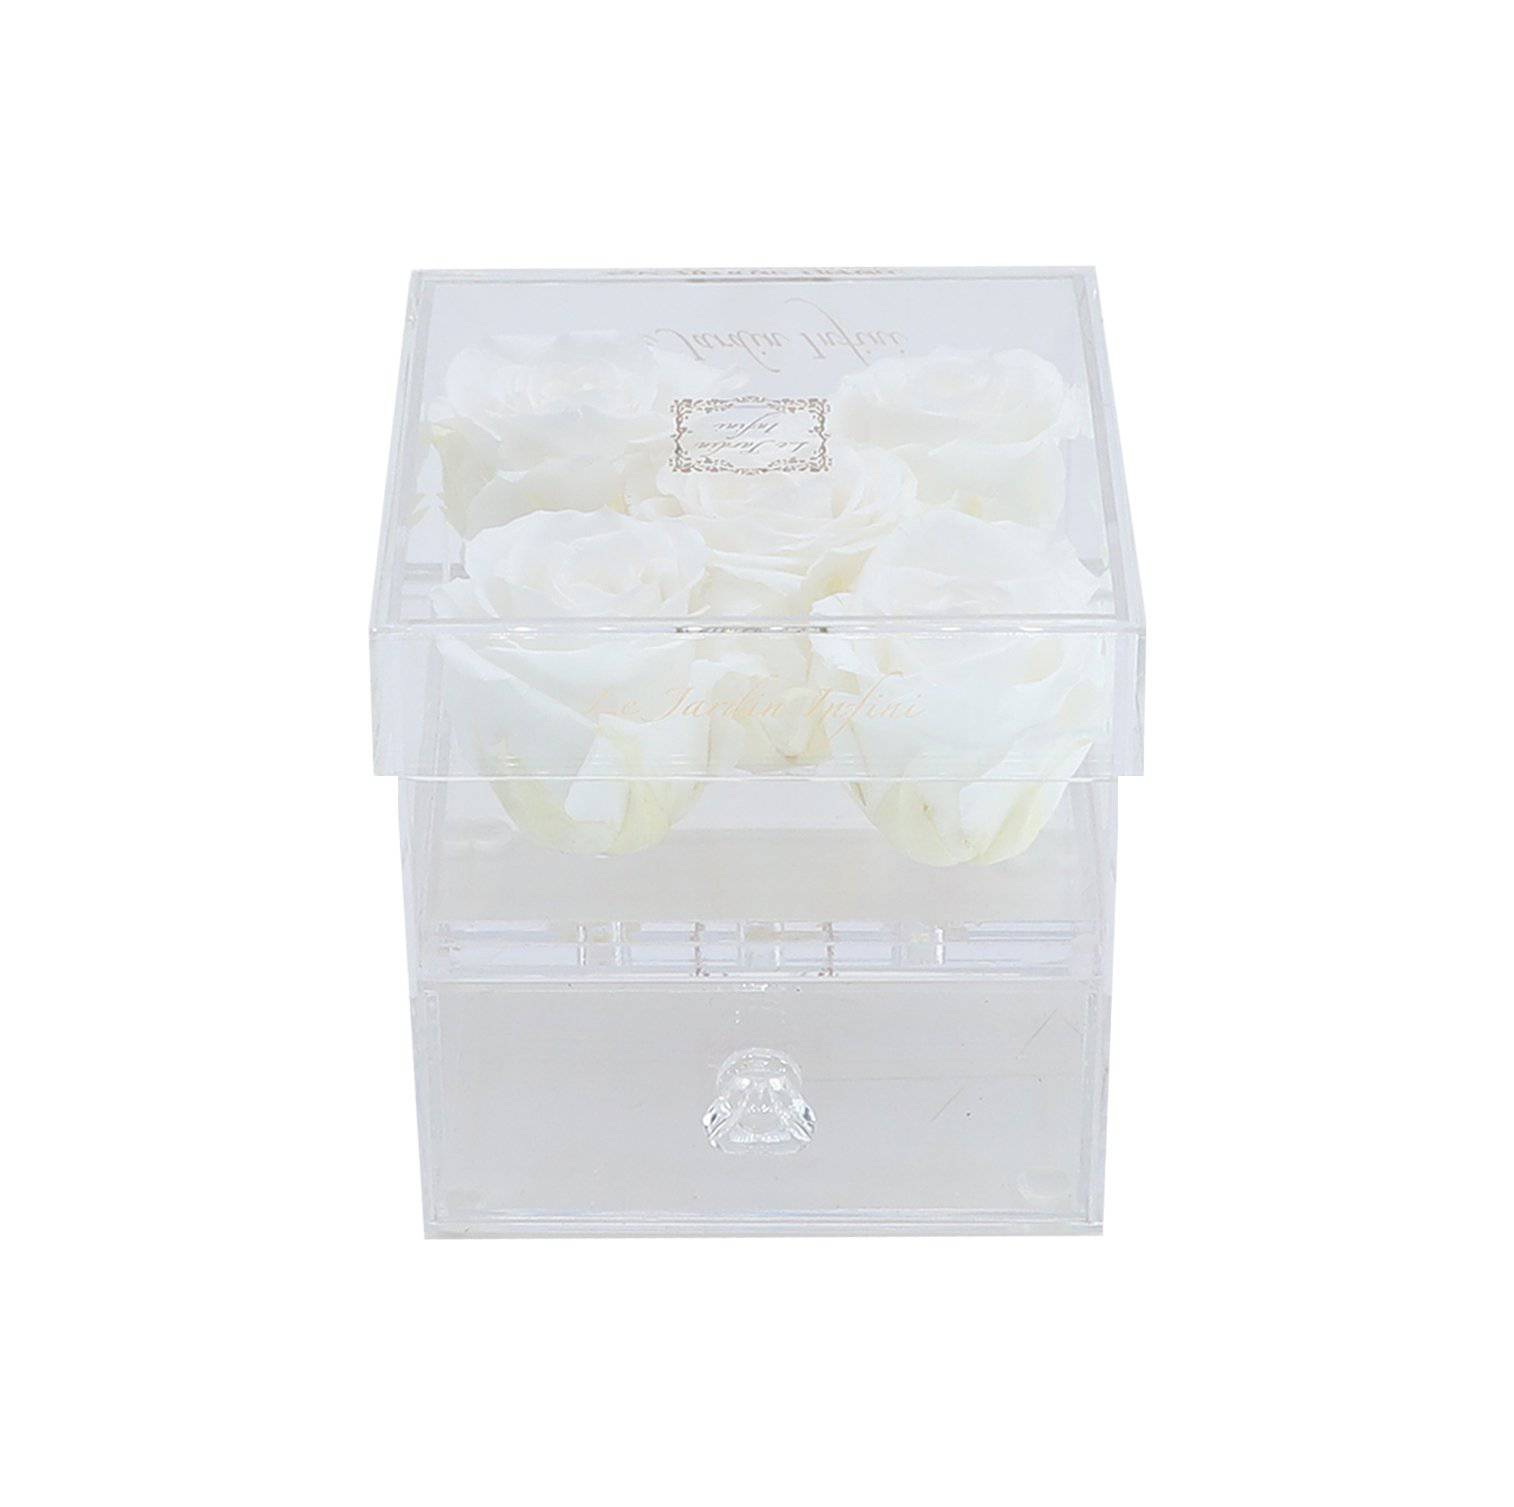 5 White Preserved Roses - Acrylic Box With Drawer - Le Jardin Infini Roses in a Box